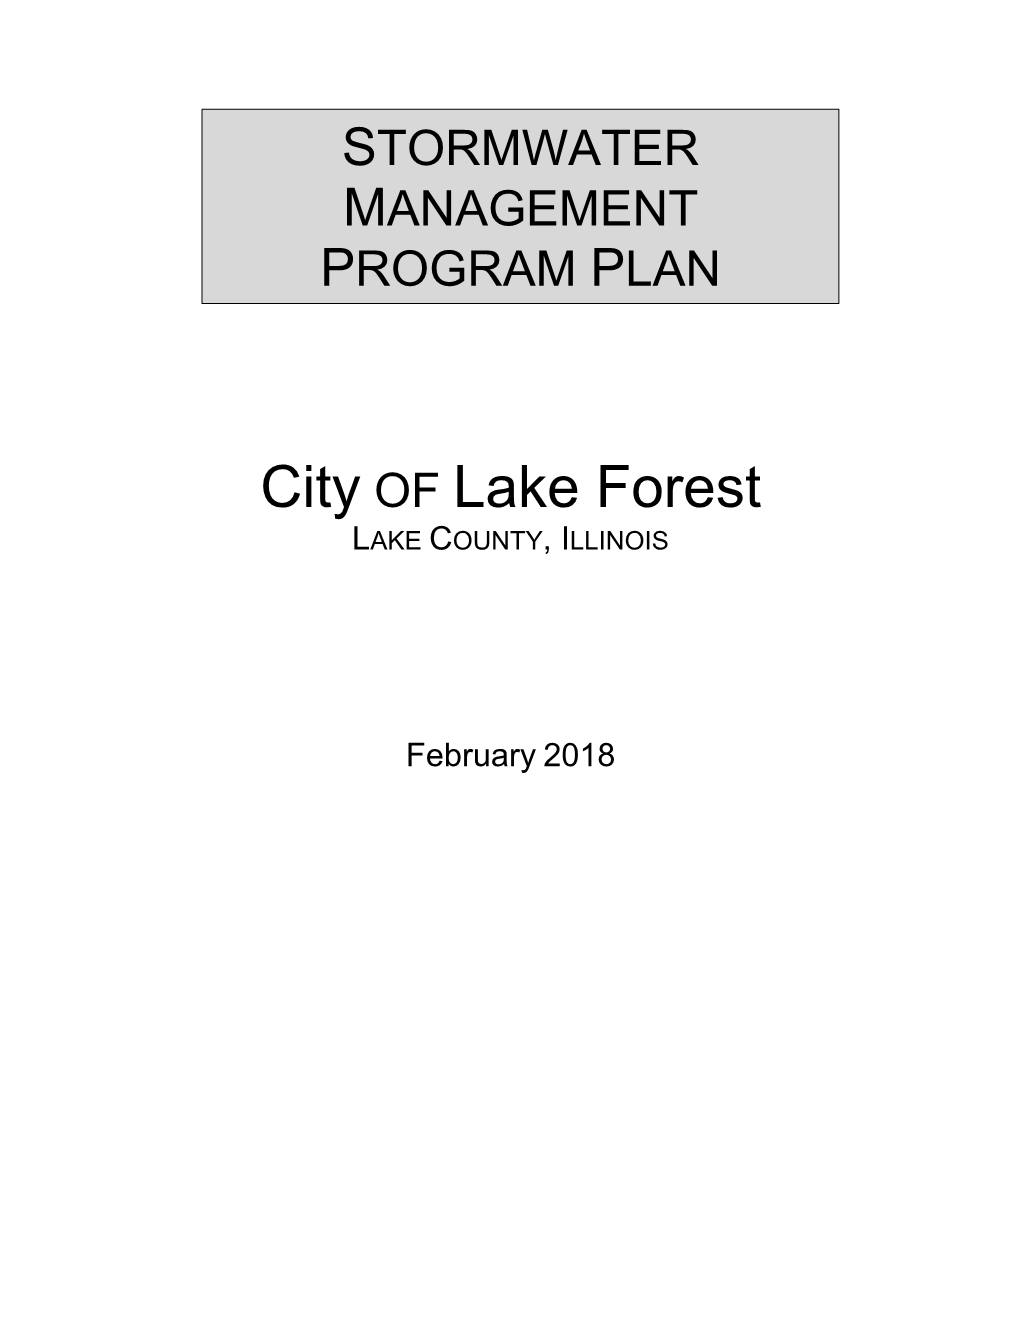 The City of Lake Forest Stormwater Management Program Plan